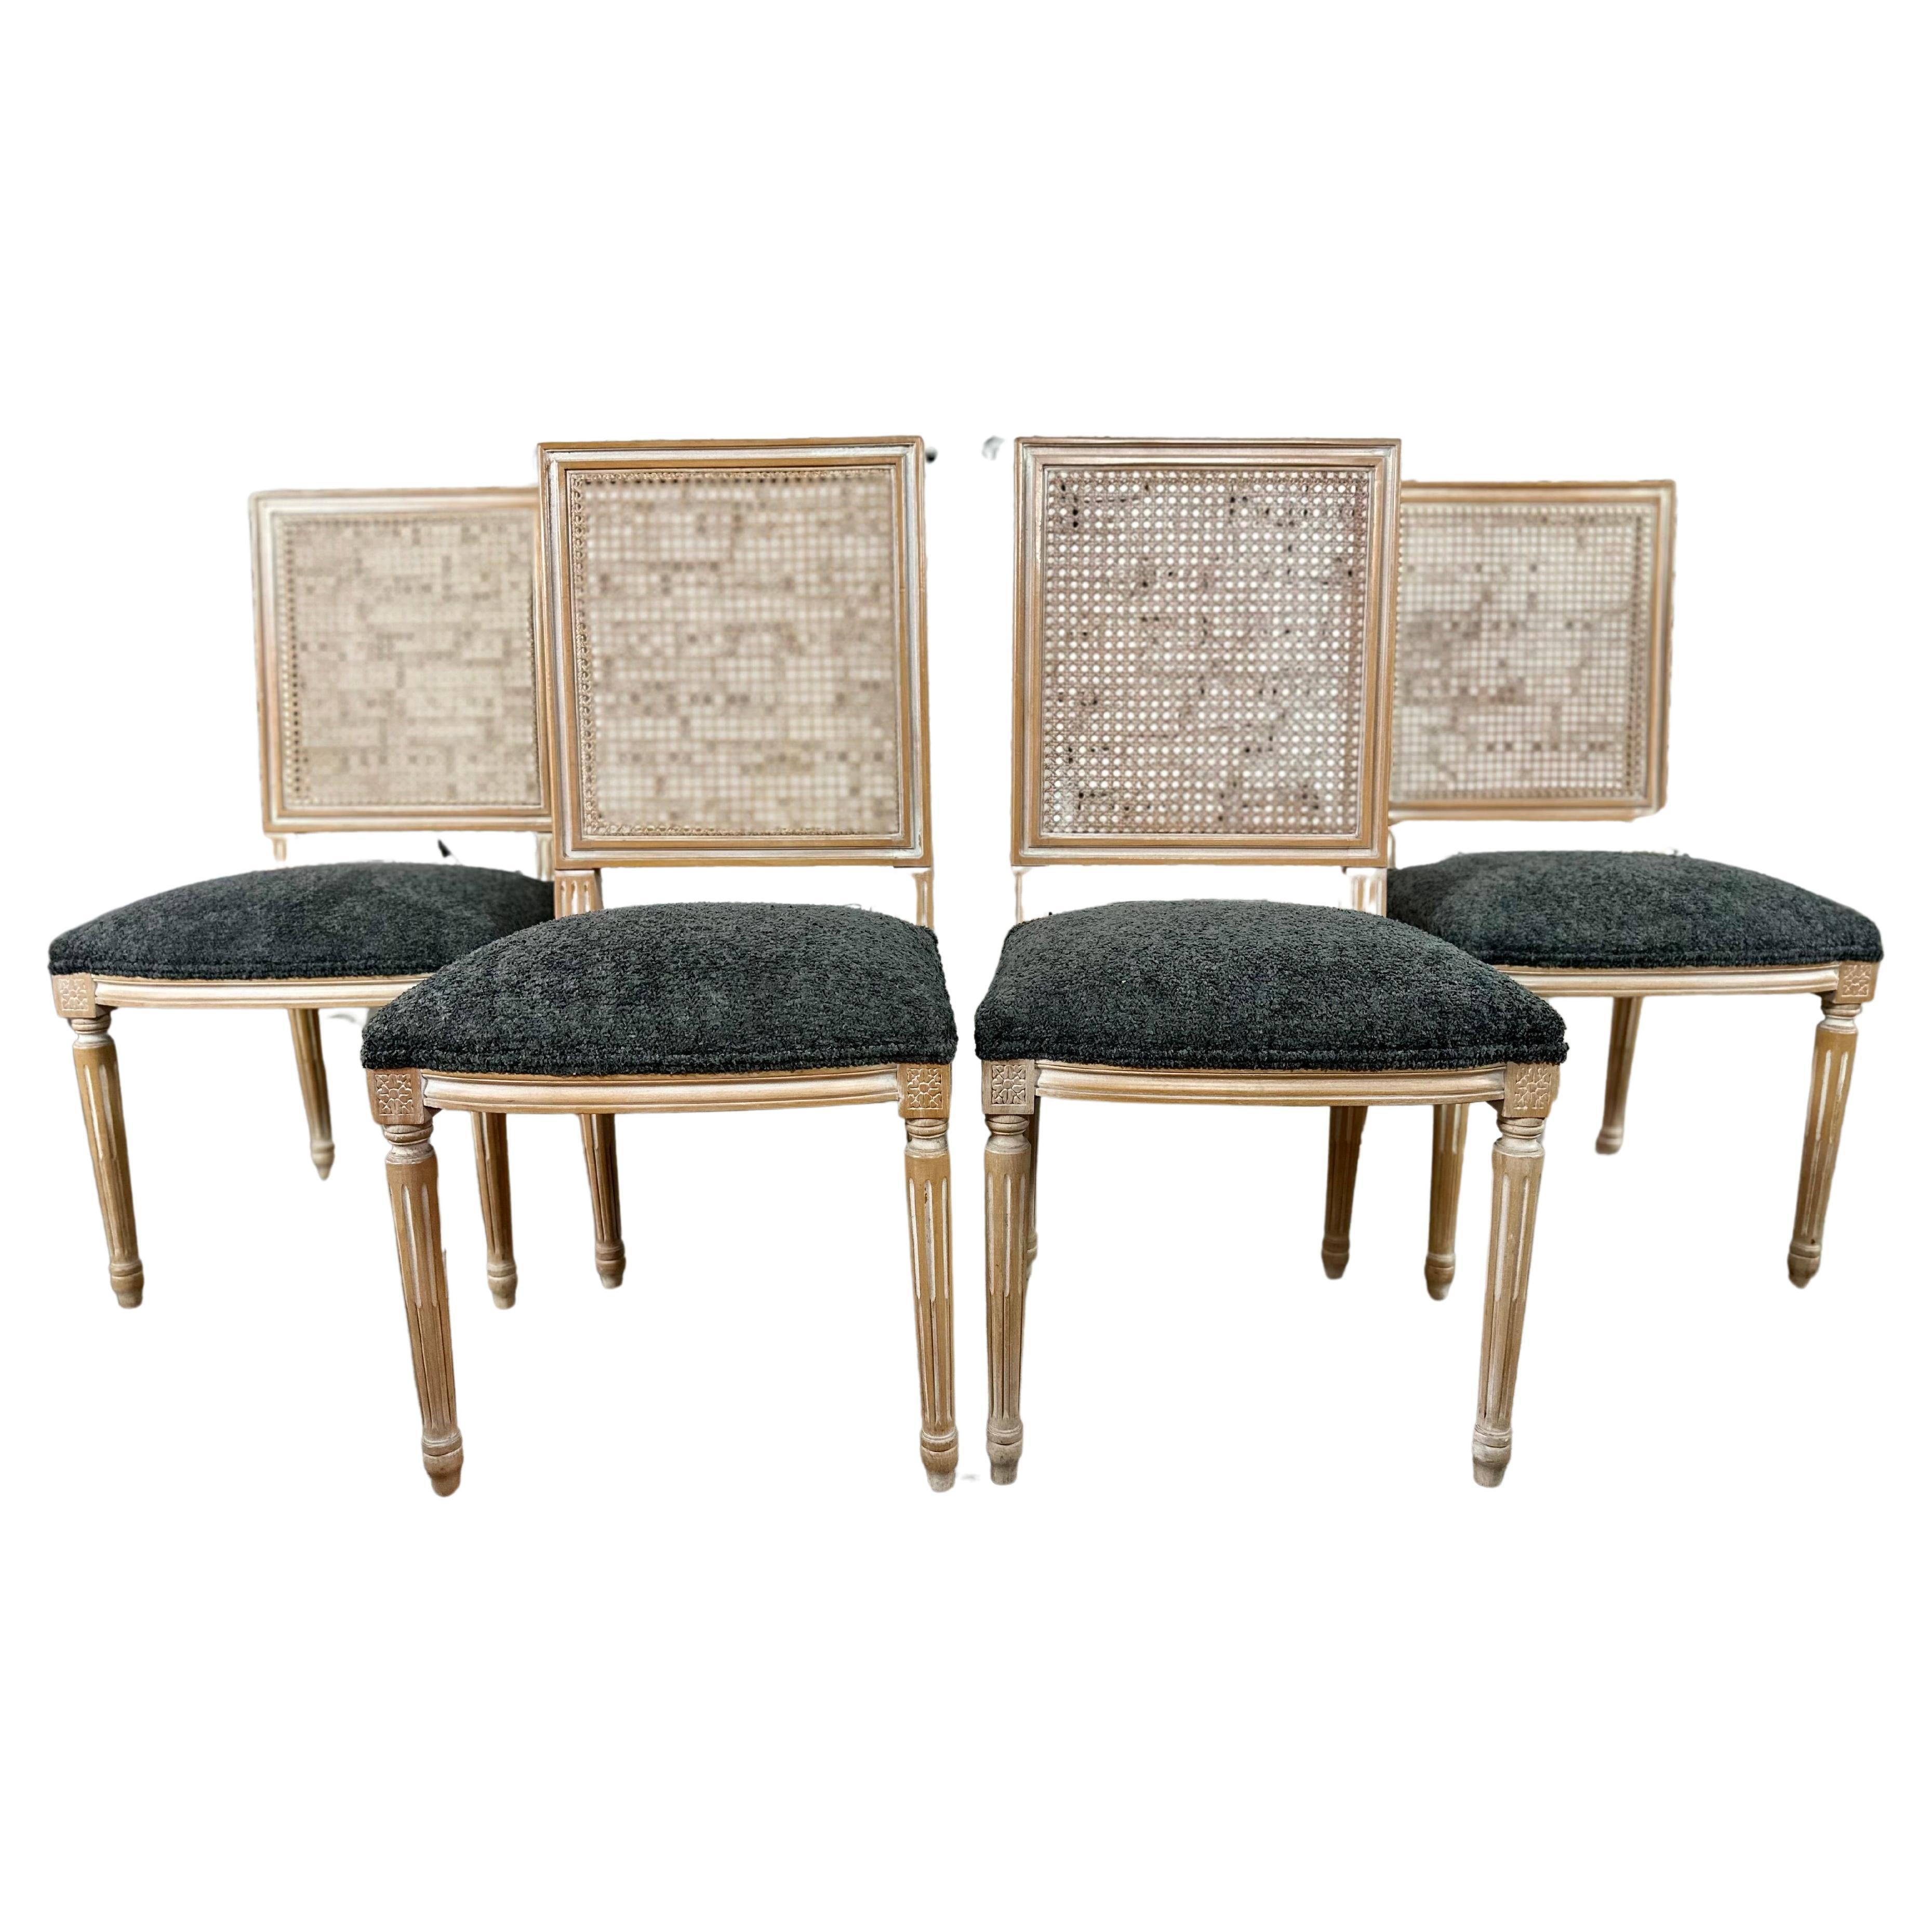 Reupholstered Square Back Louis XVI Style Dining Chairs - Set of 4 For Sale